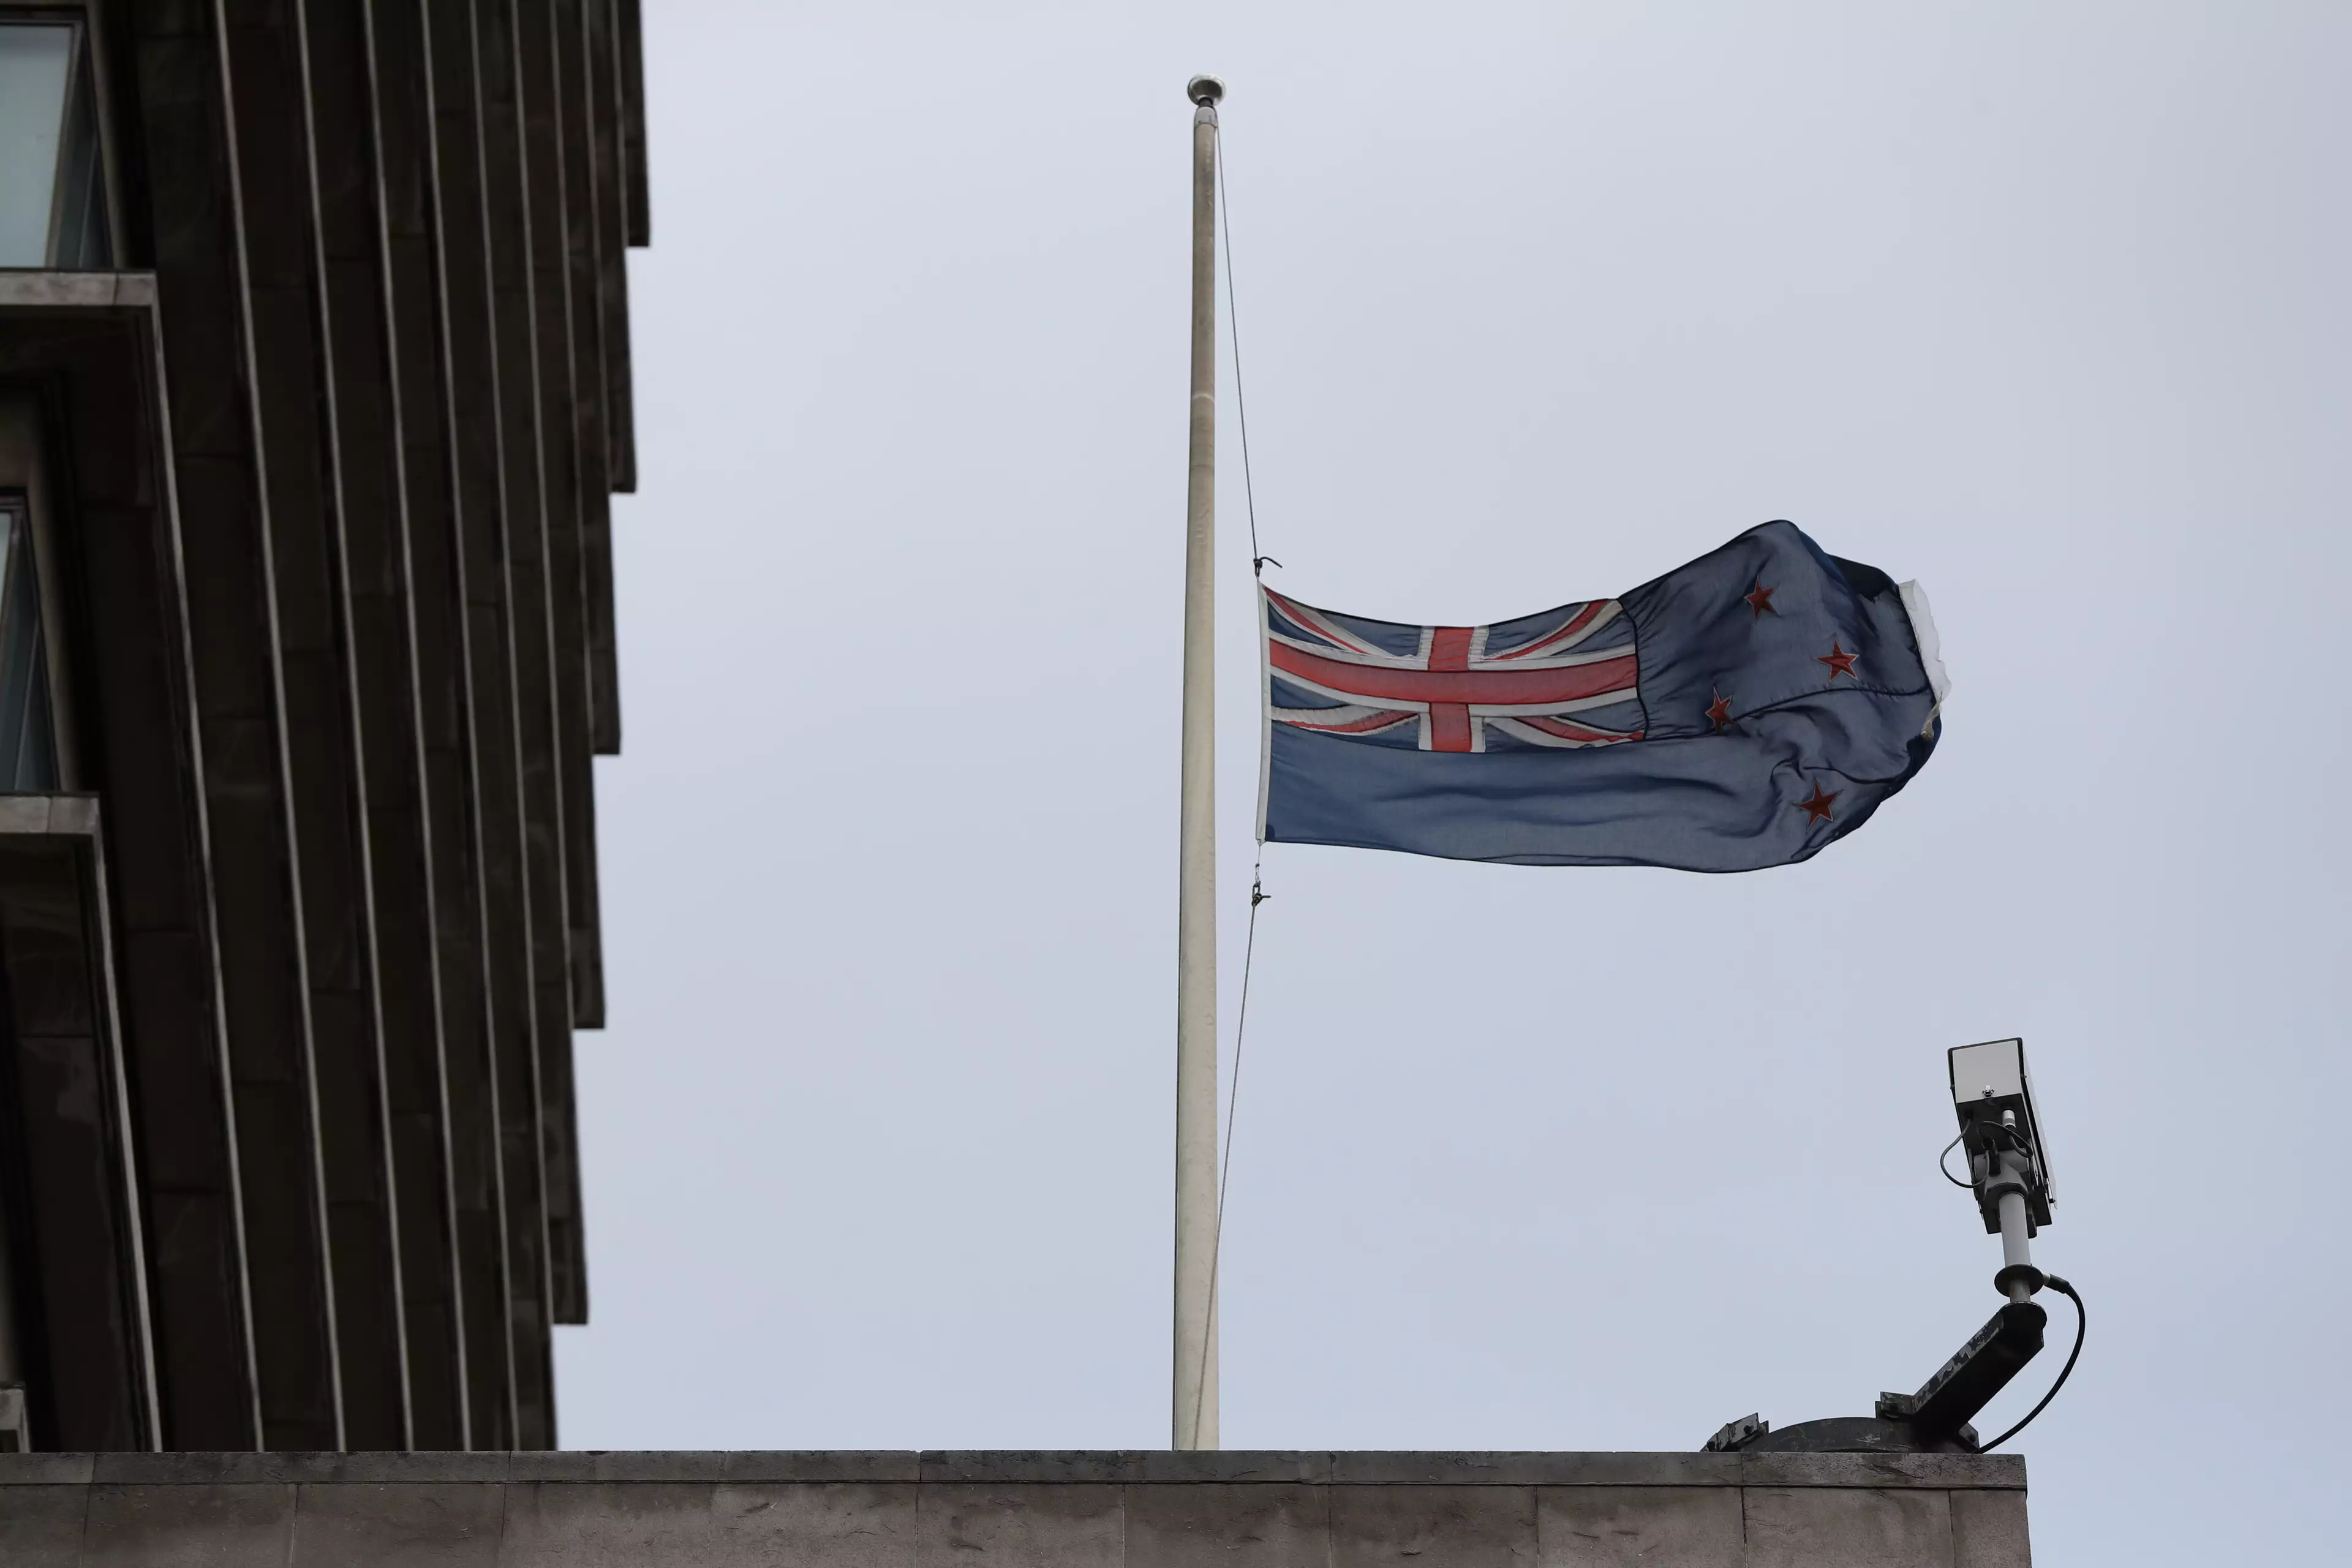 The flag flies at haft mast on the New Zealand High Commission in London.